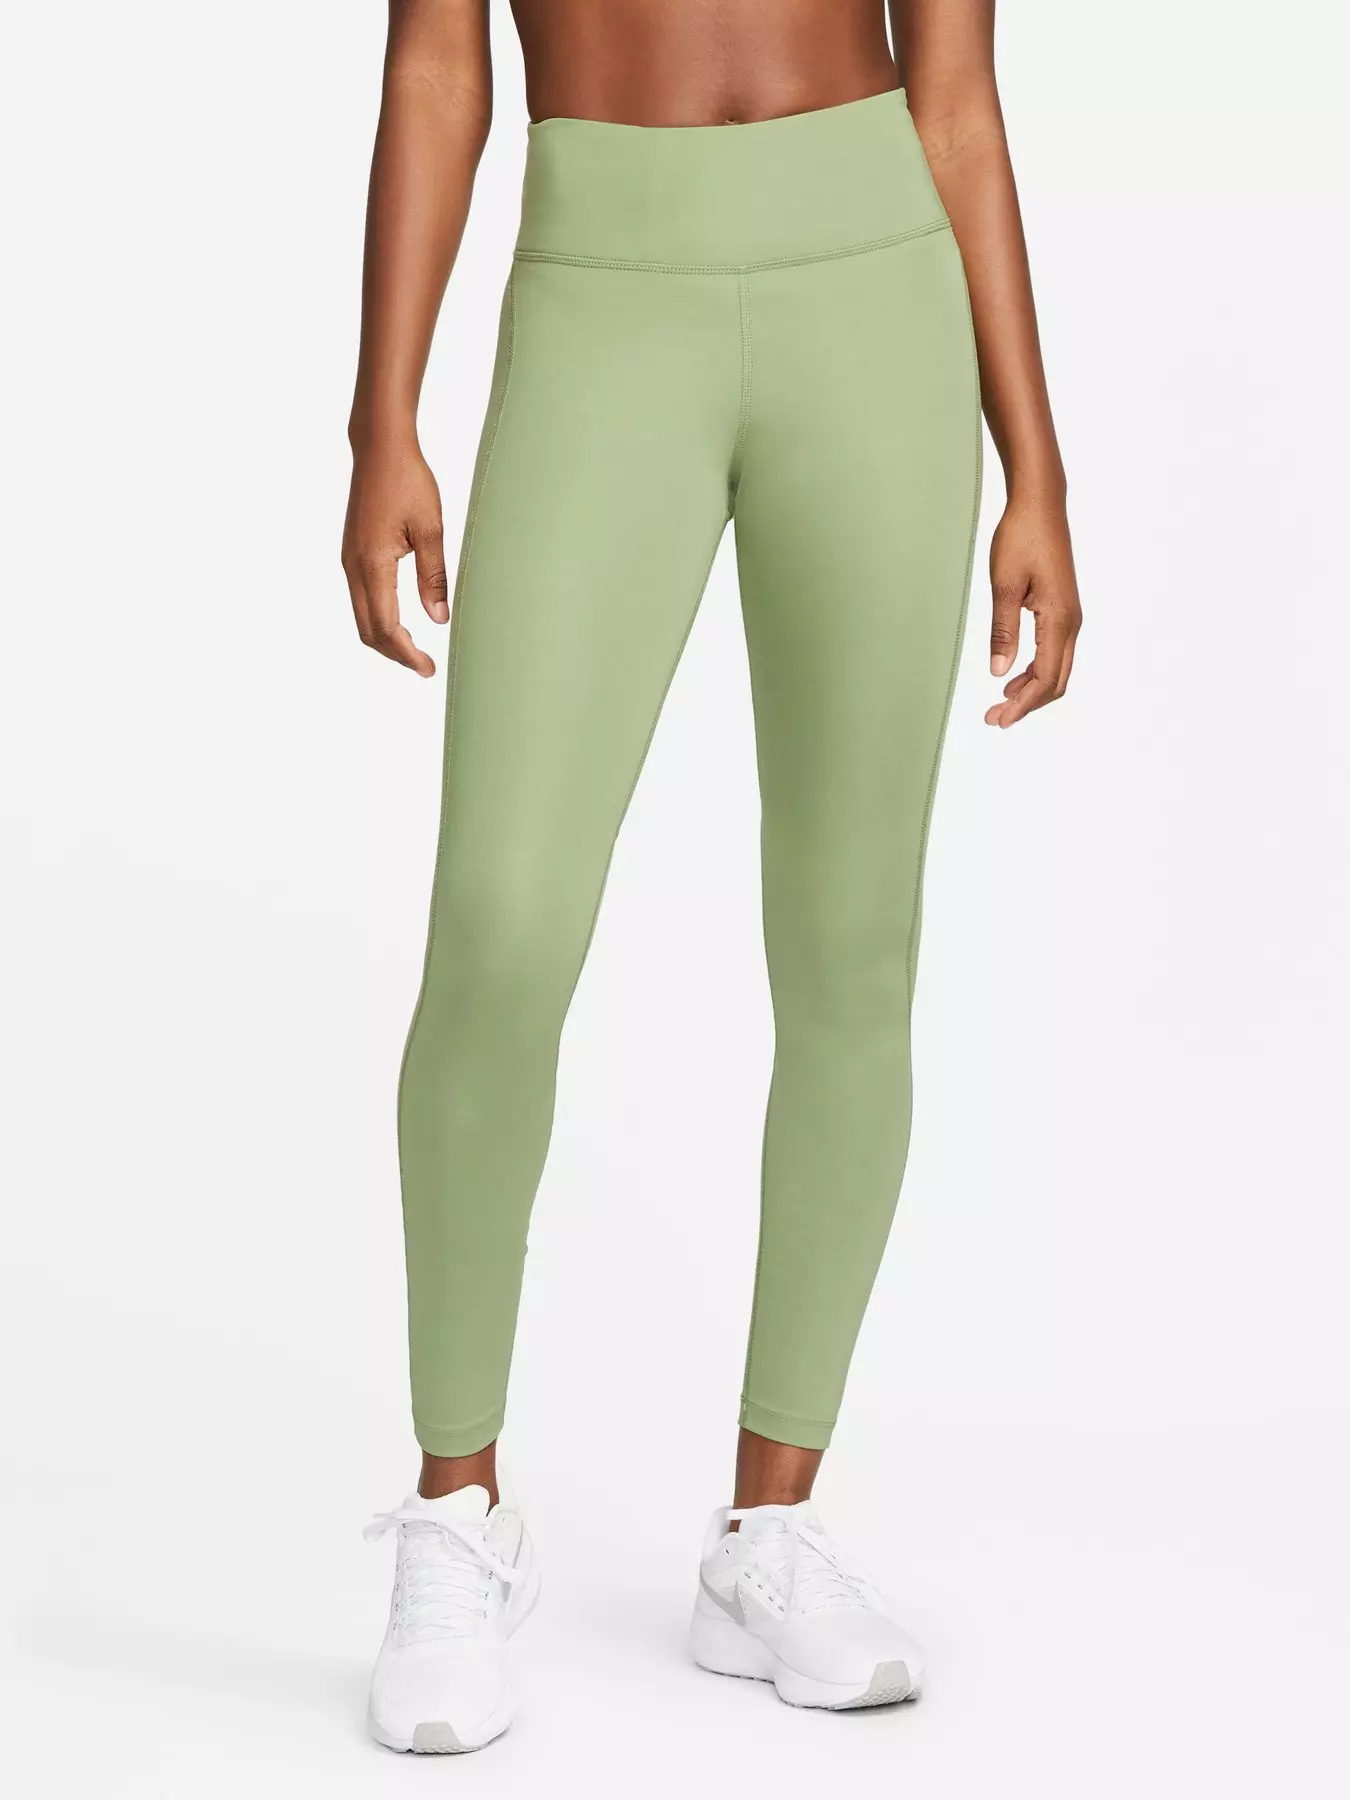 Green, Tights & leggings, Womens sports clothing, Sports & leisure